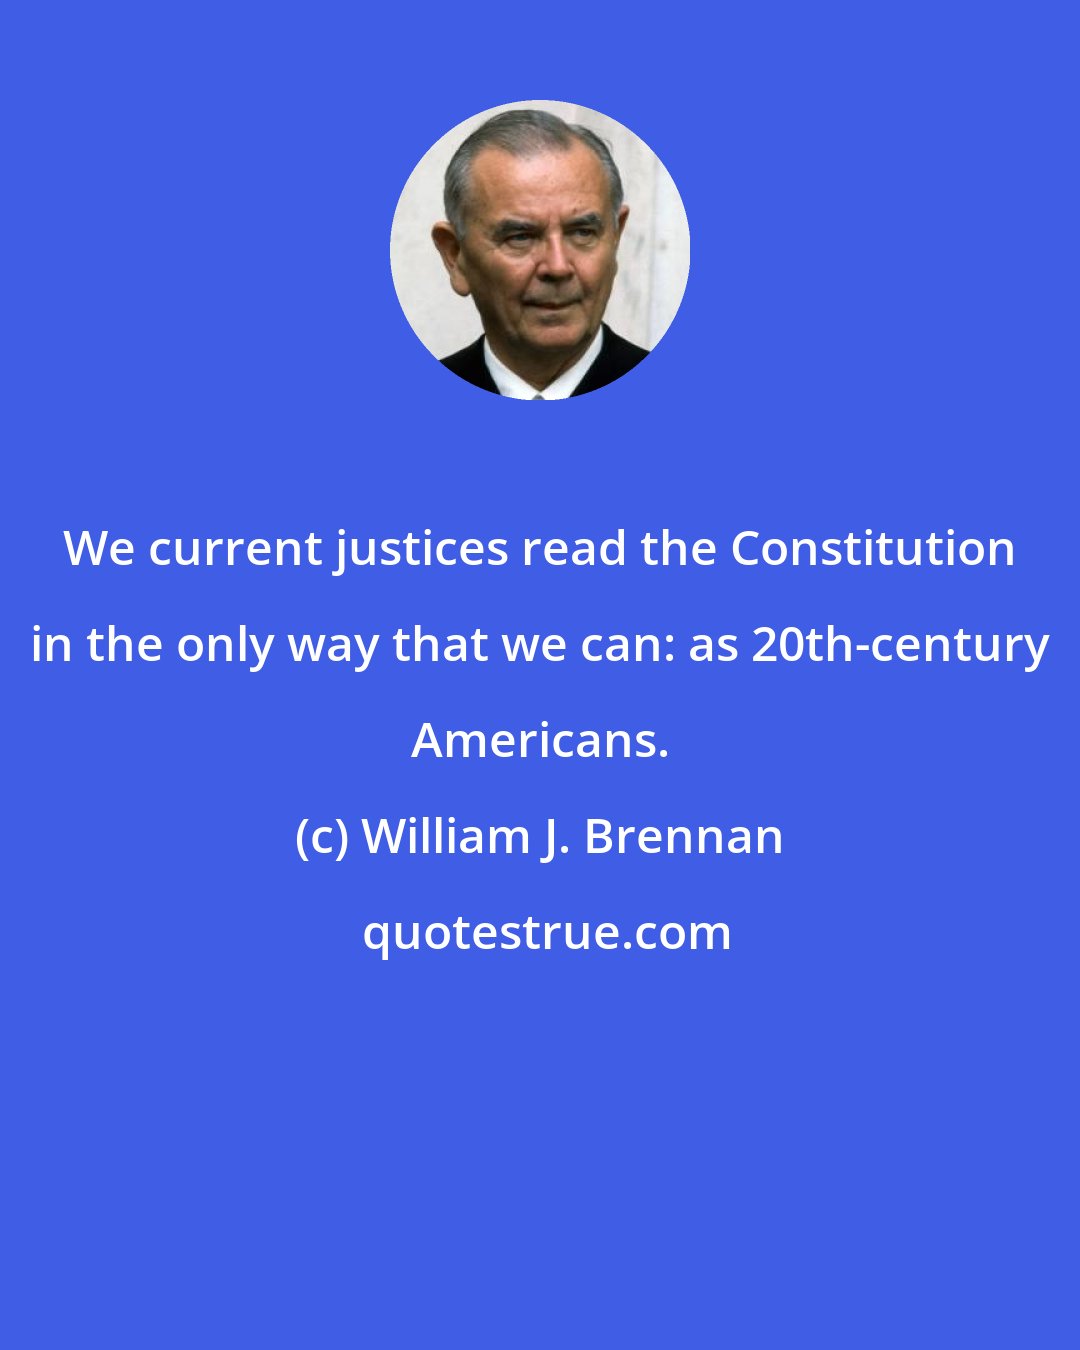 William J. Brennan: We current justices read the Constitution in the only way that we can: as 20th-century Americans.